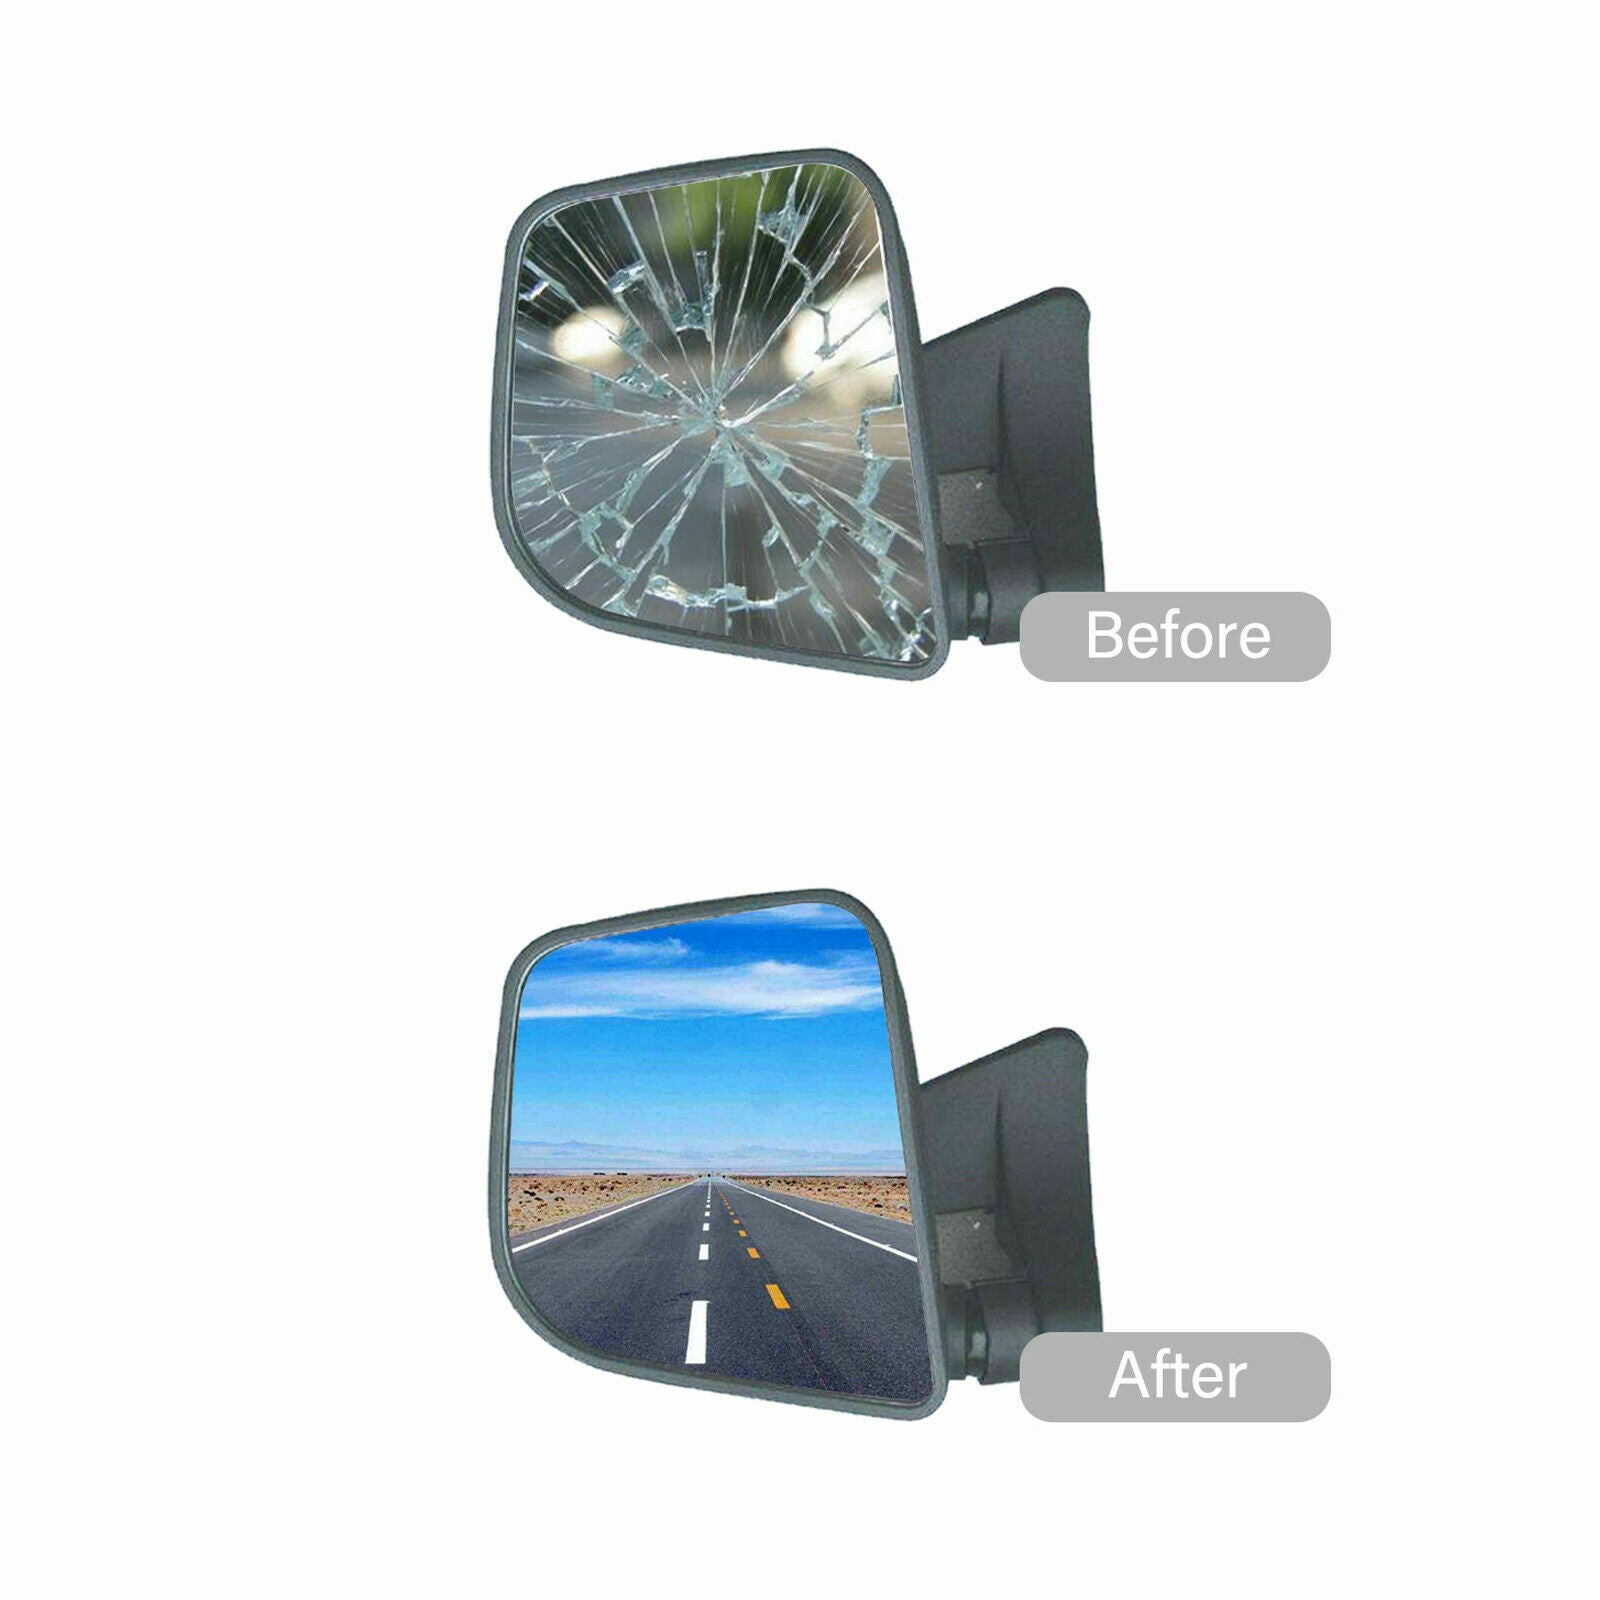 WLLW Blind-Spot Replace Mirror Glass for 2017-2022 Nissan Titan/2016-2019 Nissan Titan XD, Driver Left Side LH/Passenger Right Side RH/The Both Sides Convex M-0073